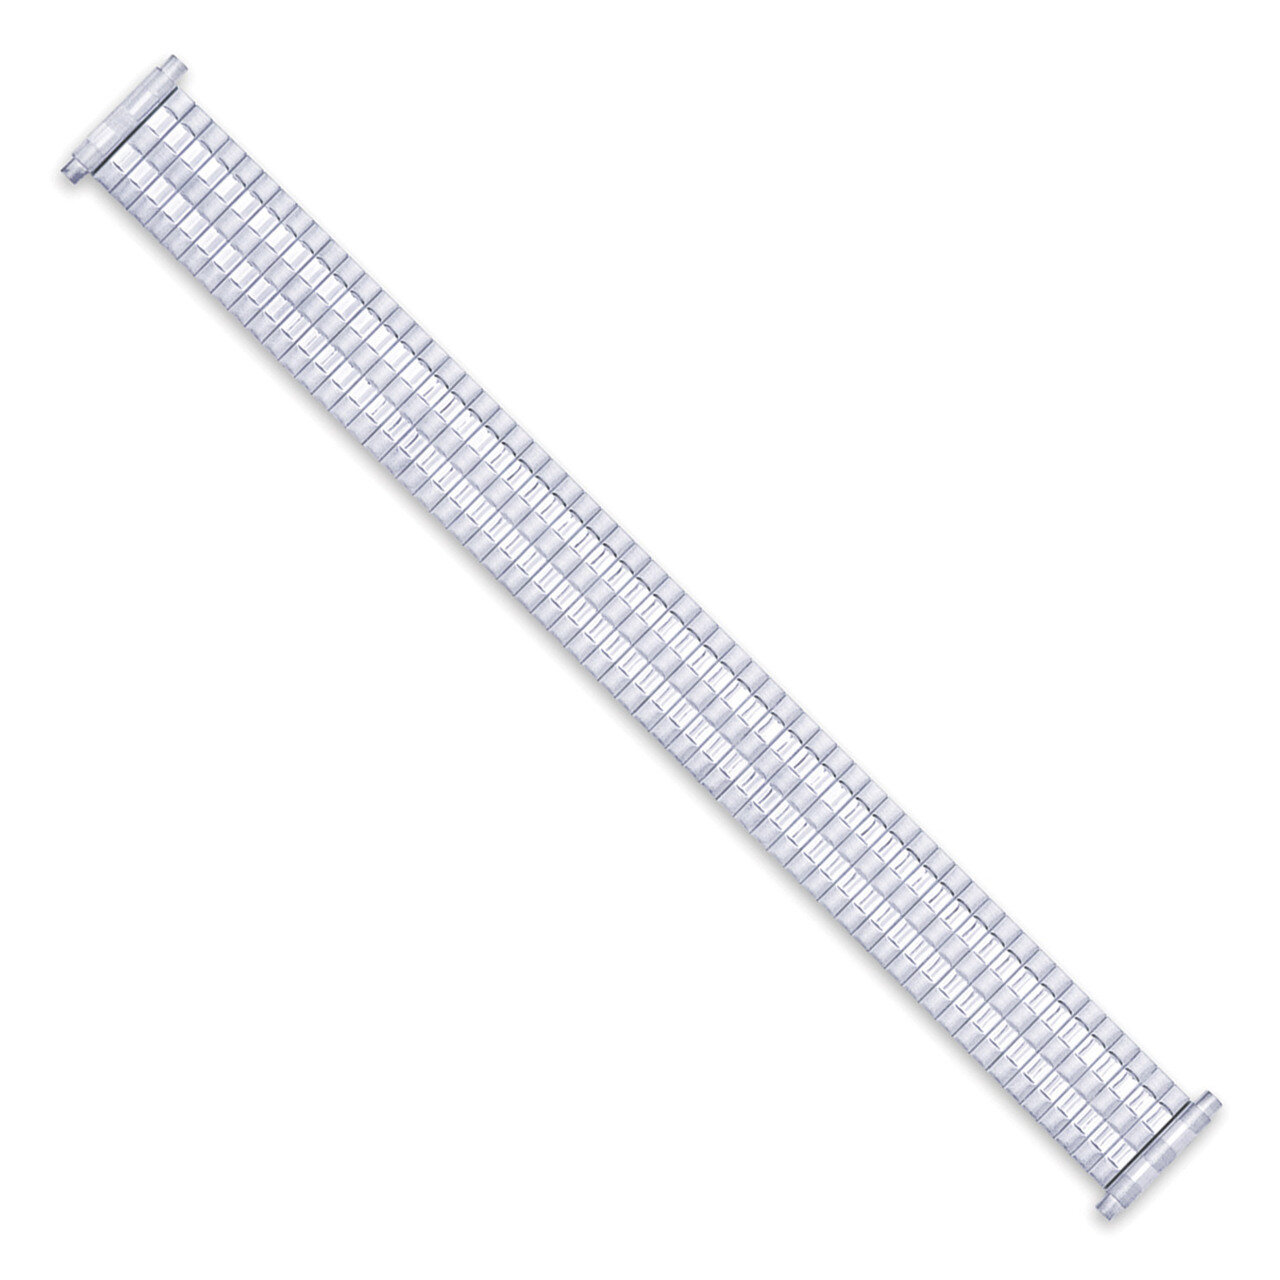 12-16mm Silver-tone ThinFlexo Satin Mirror Expansion Watch Band BA273